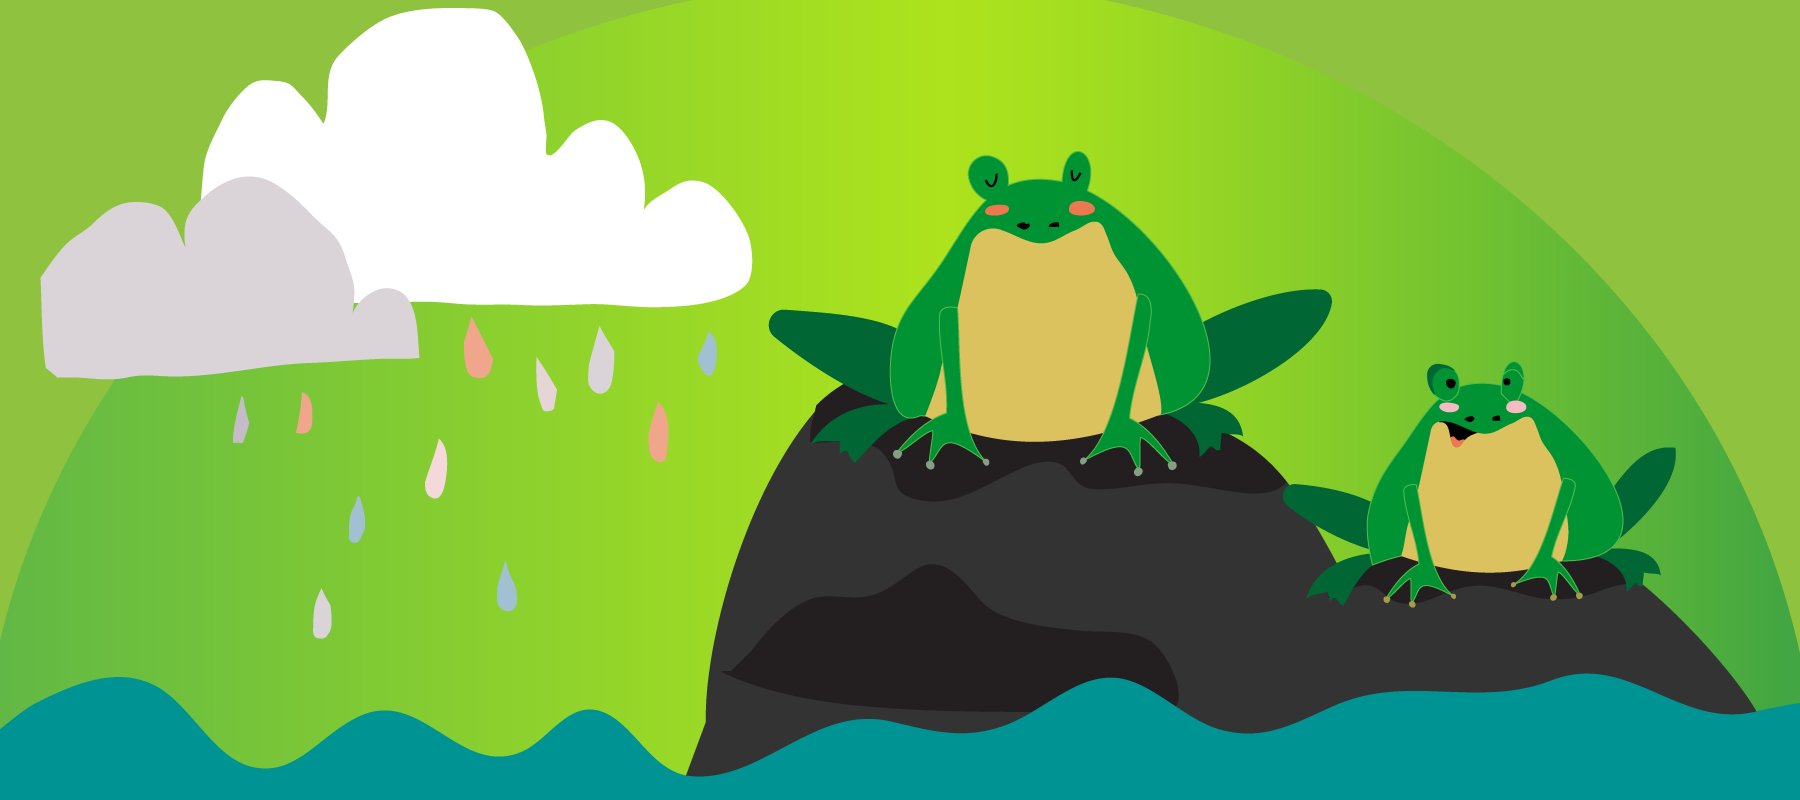 Illustration on a green background - two frogs sit on rocks with a rain cloud raining down multicolored drops.